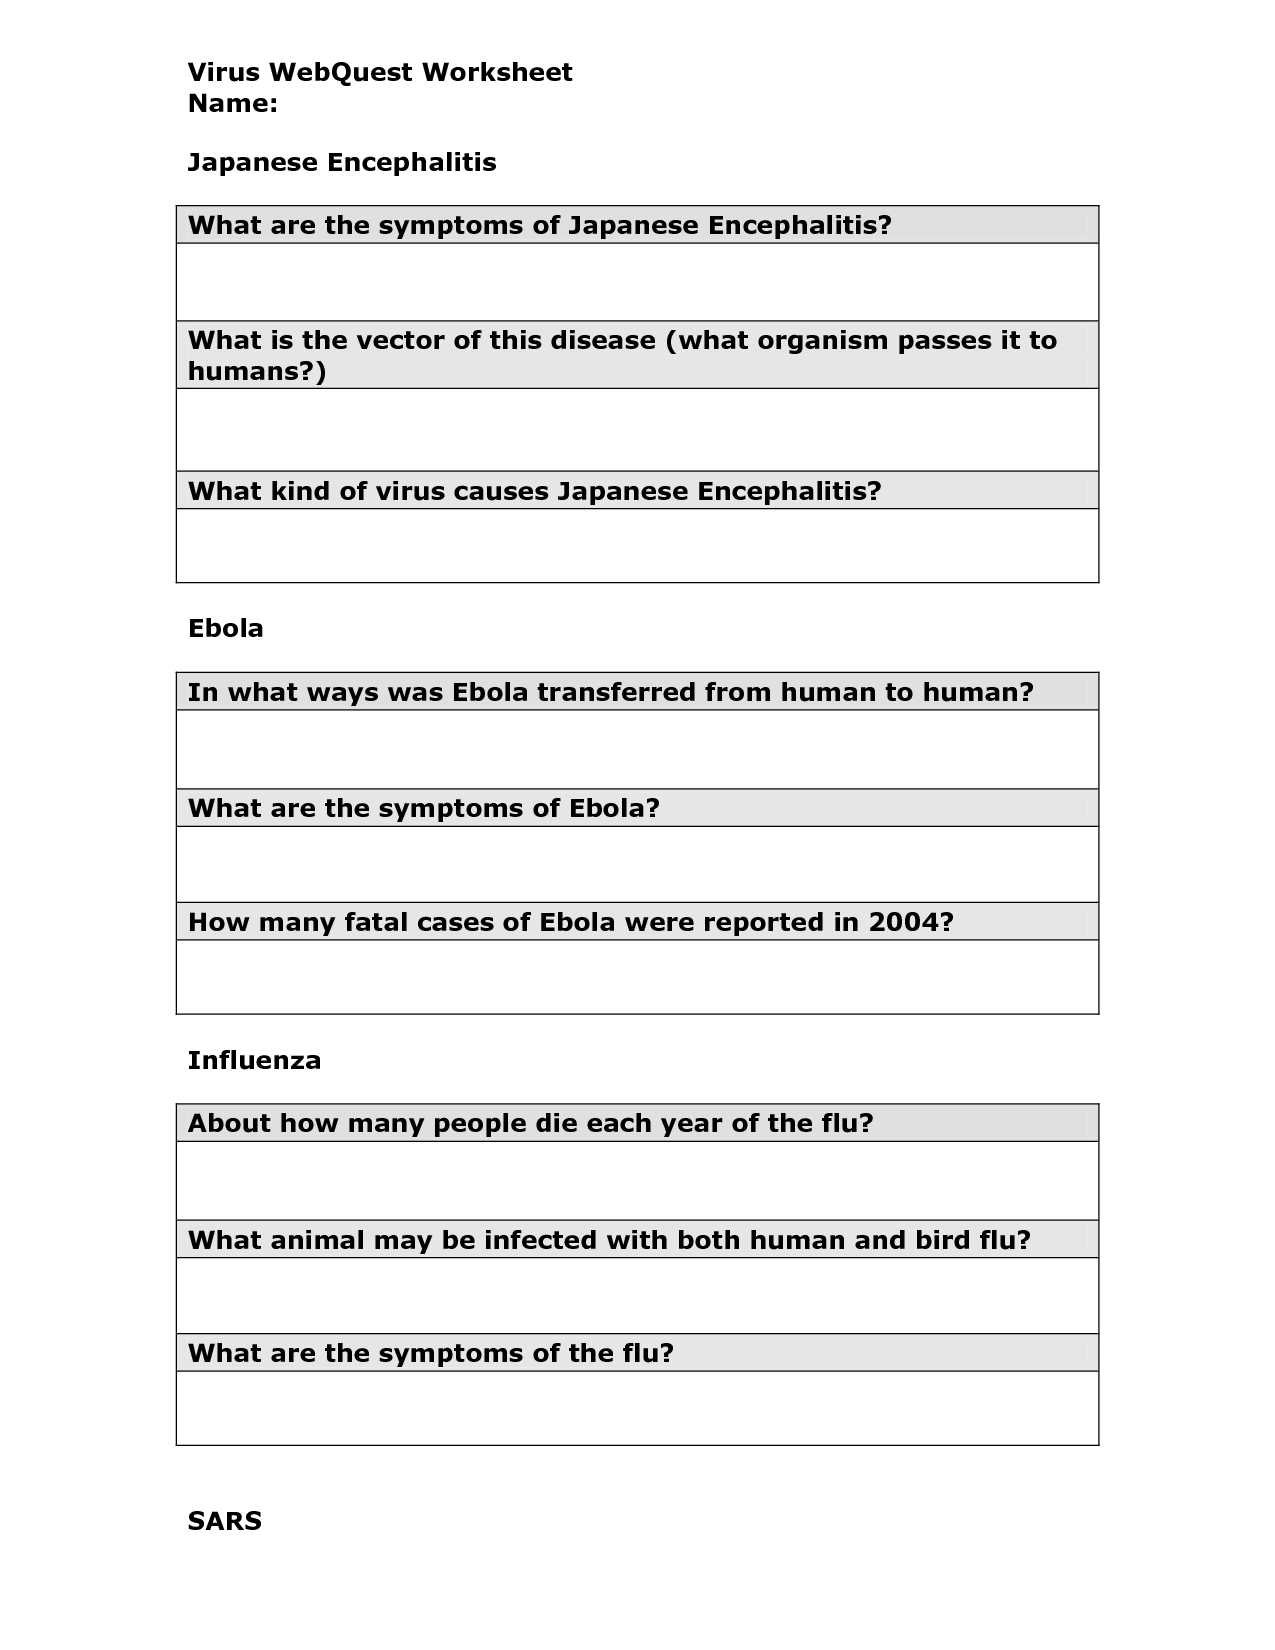 Virus and Bacteria Worksheet Answer Key with Virus Webquest Worksheet Image Collections Worksheet Math for Kids